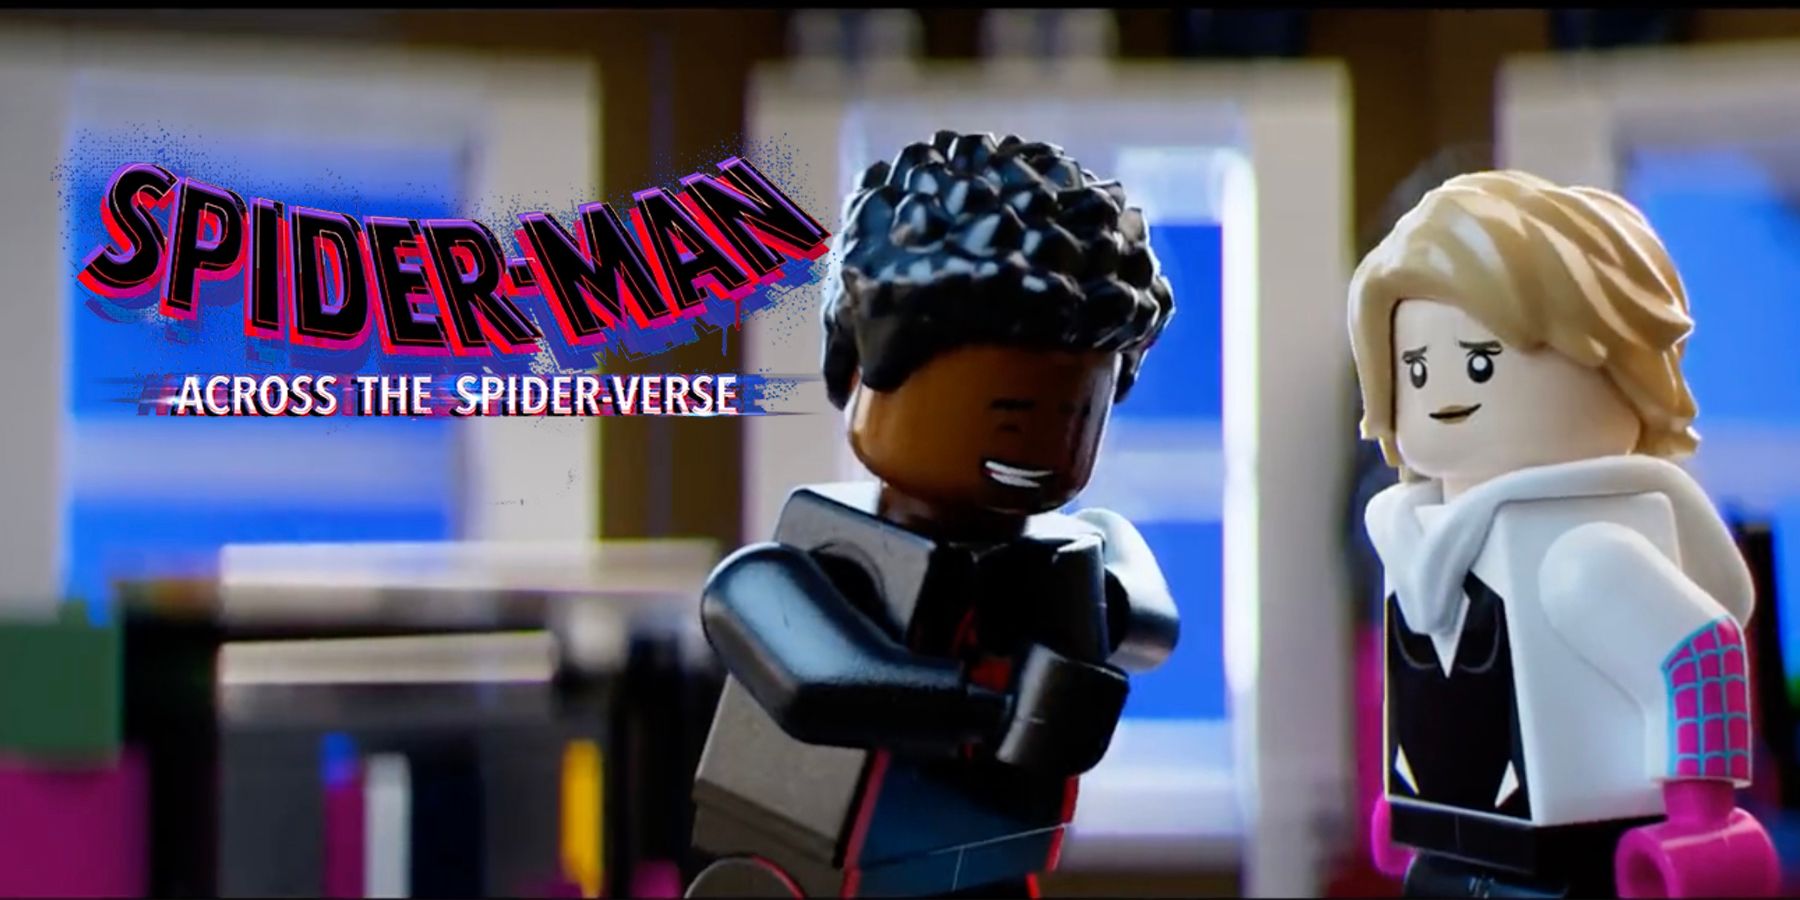 Across the Spider-Verse Lego scene was created by a 14-year-old artist